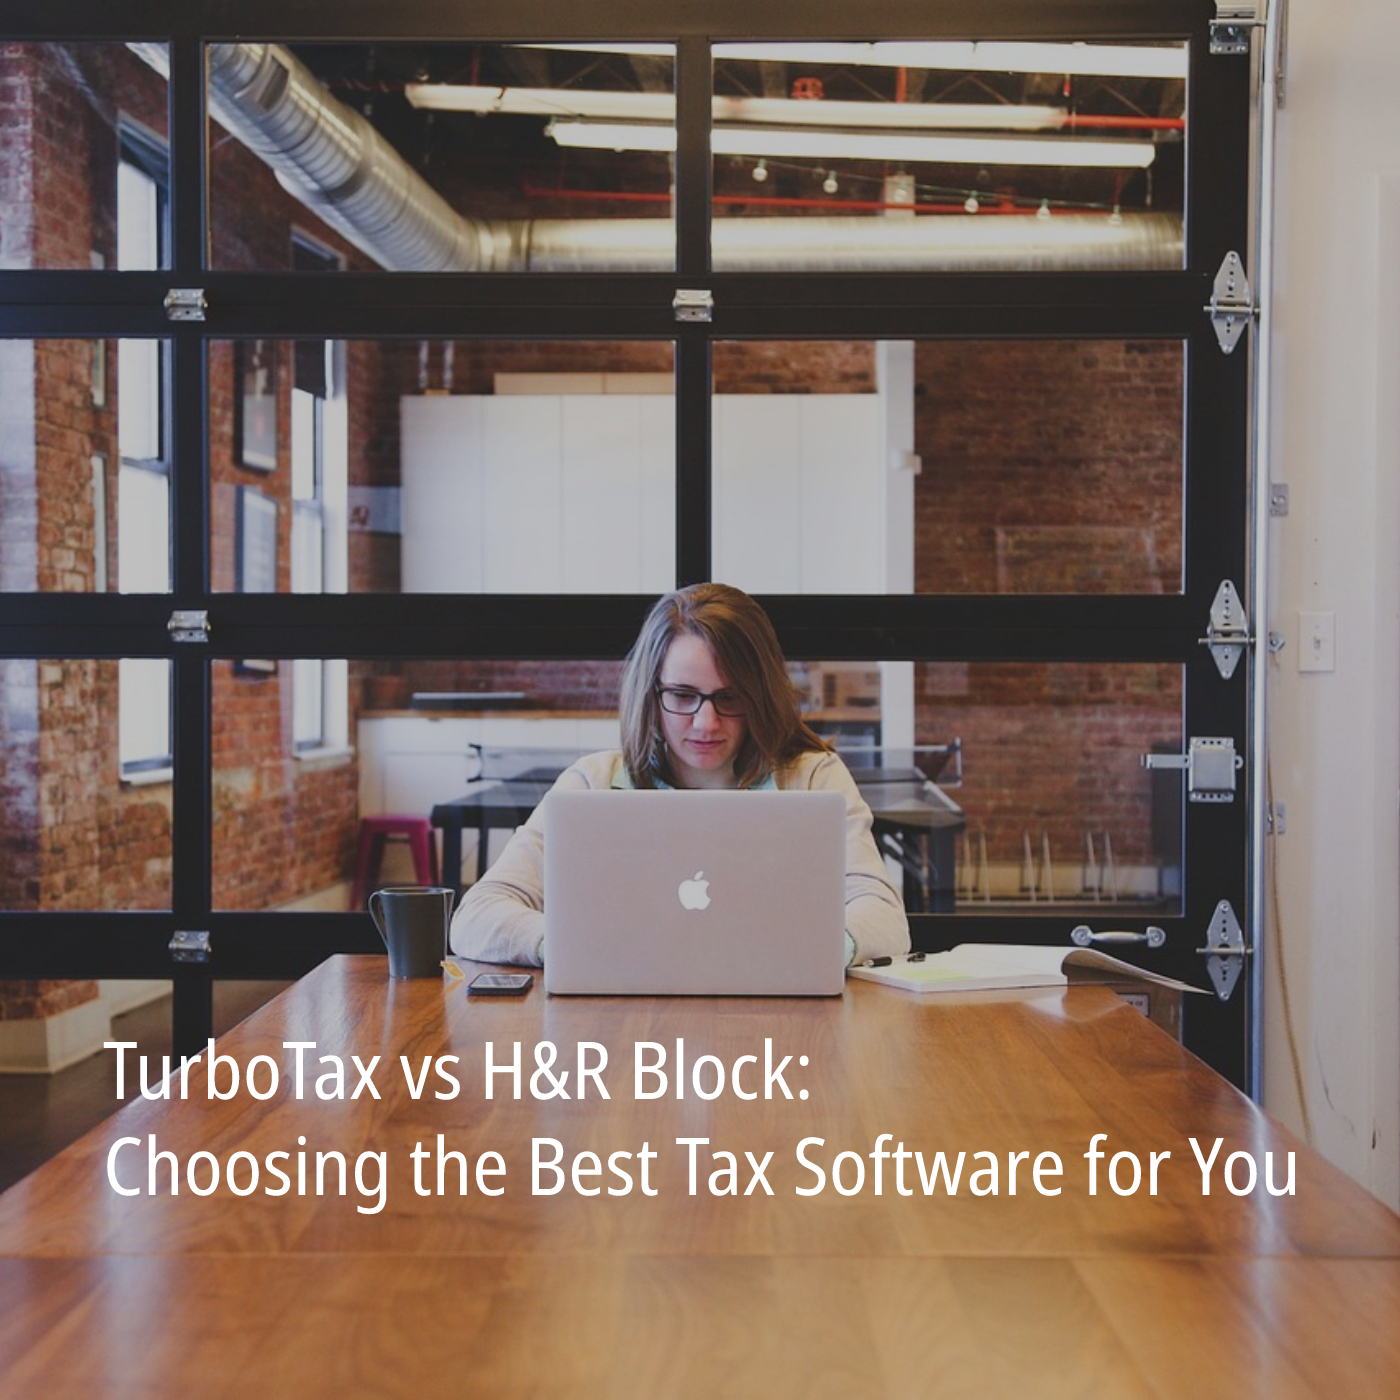 TurboTax vs H&R Block: Choosing the Best Tax Software for You